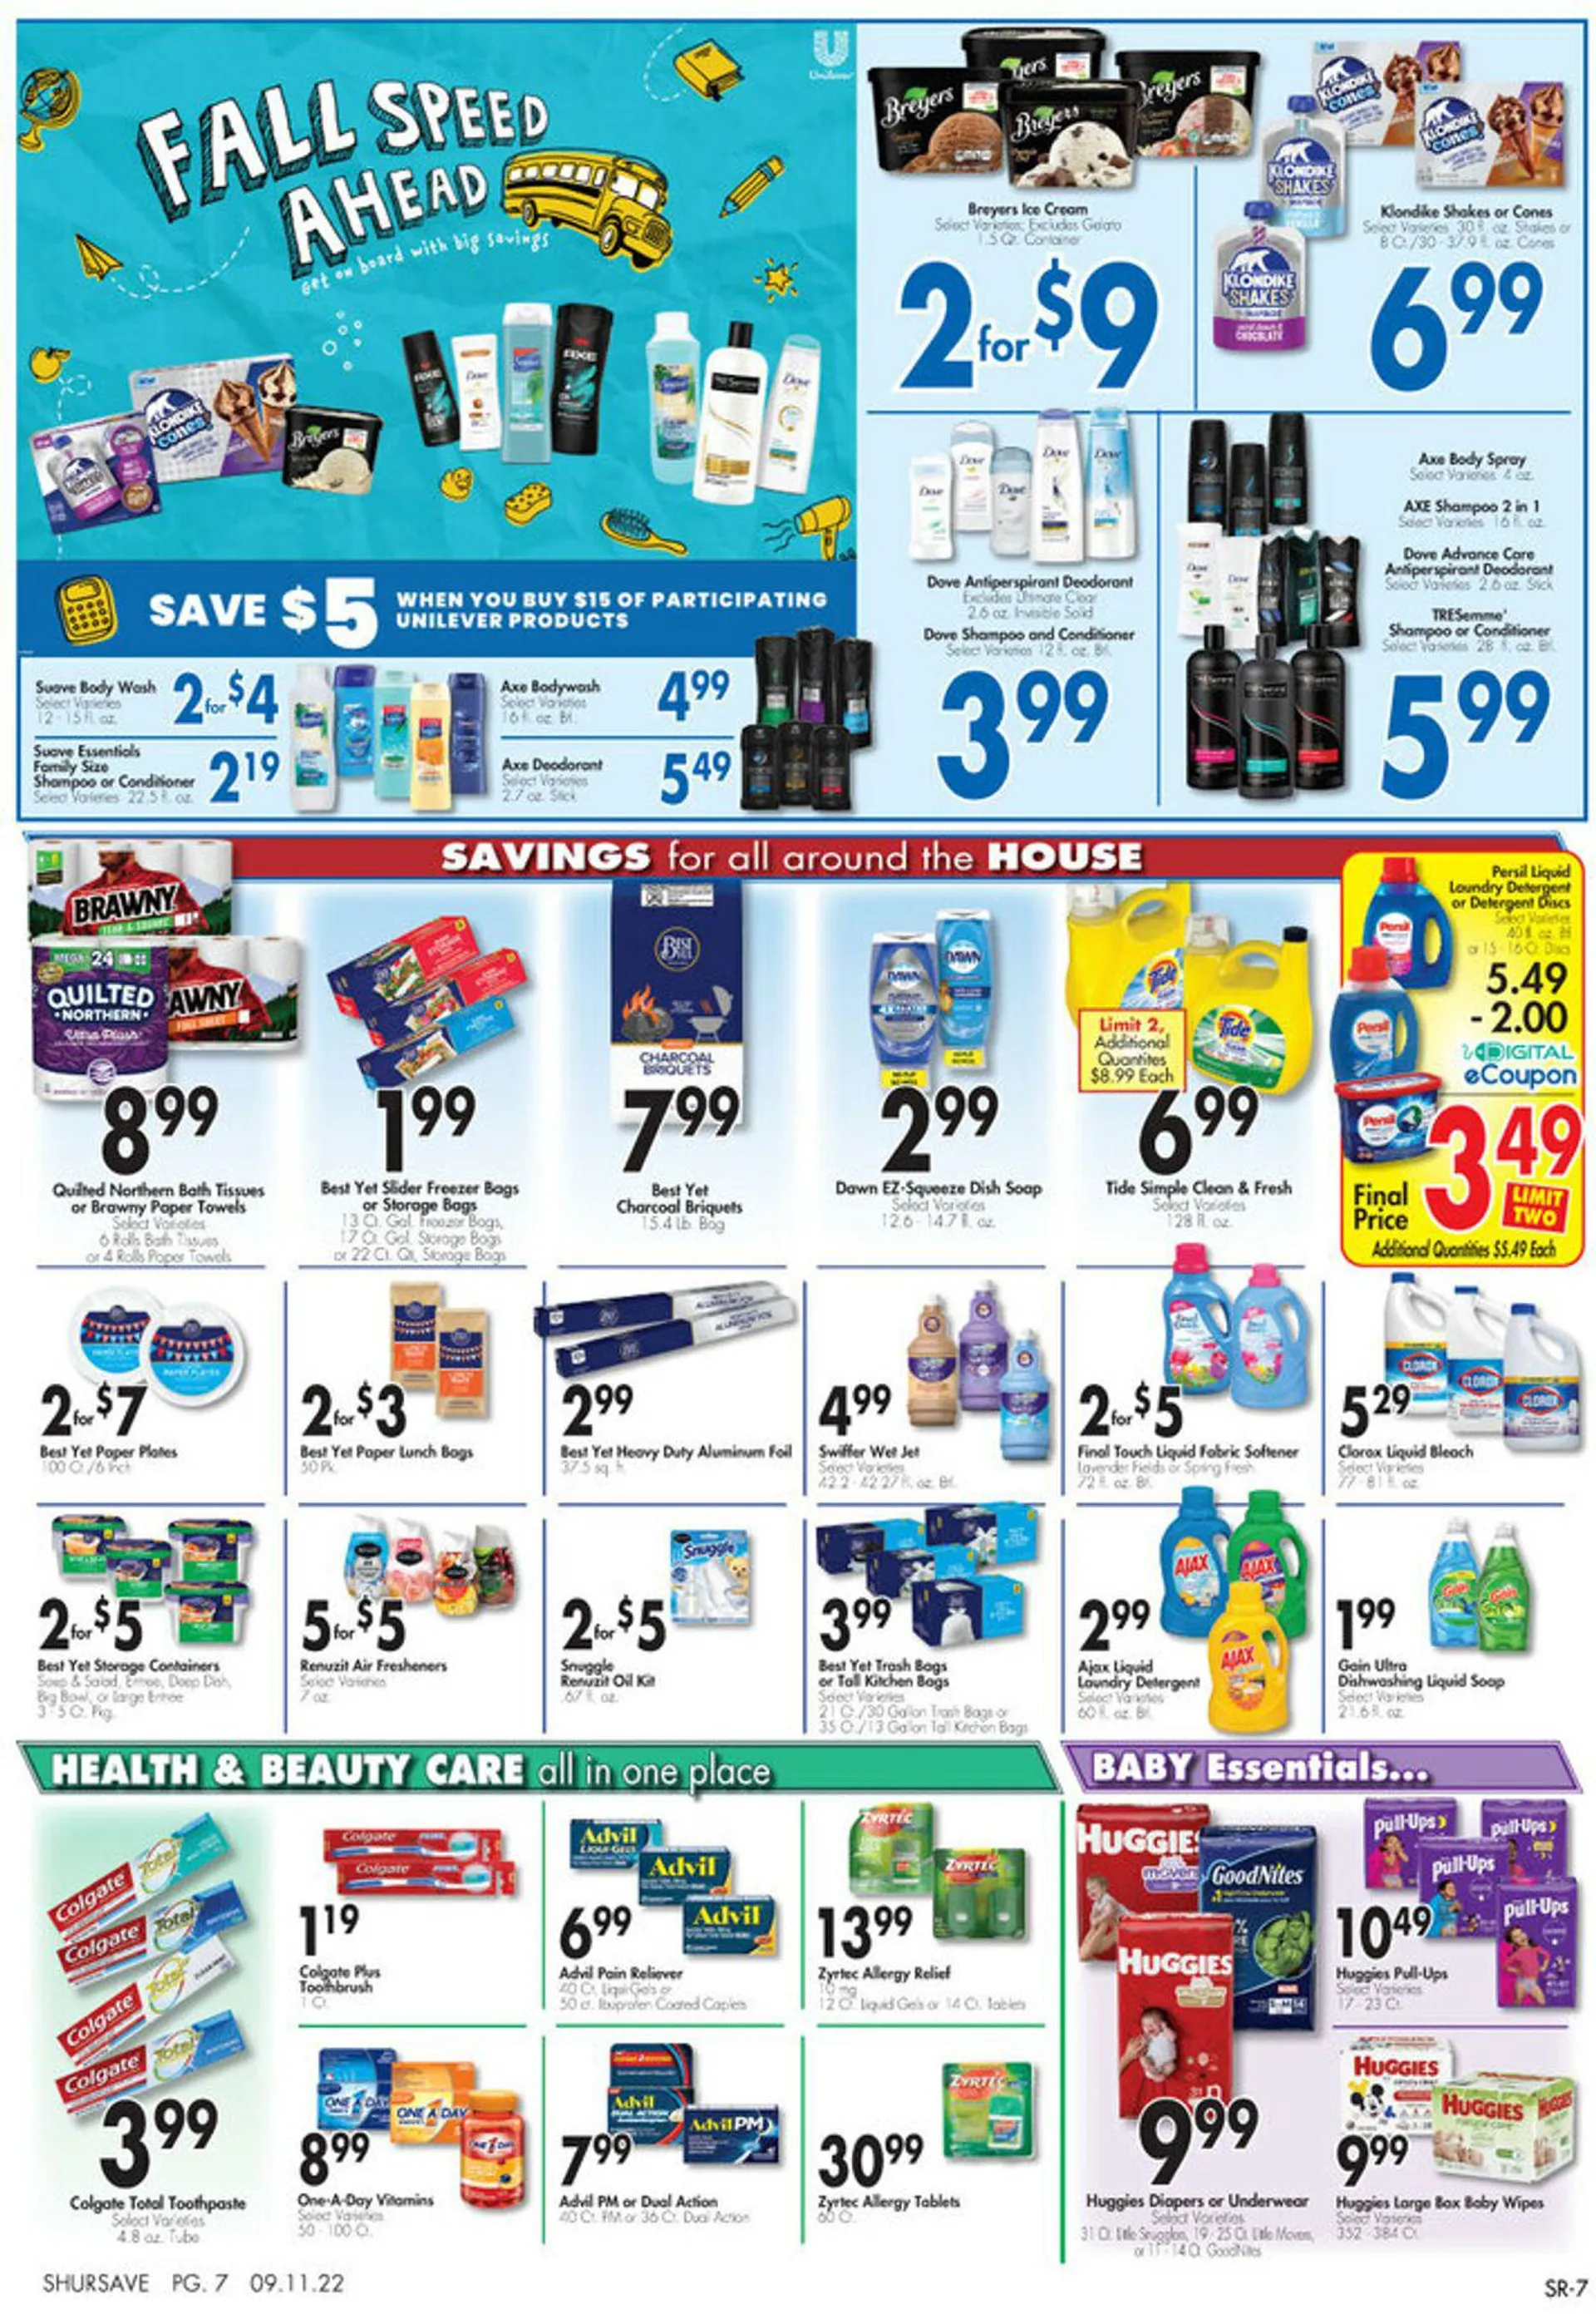 Gerritys Supermarkets Current weekly ad - 8